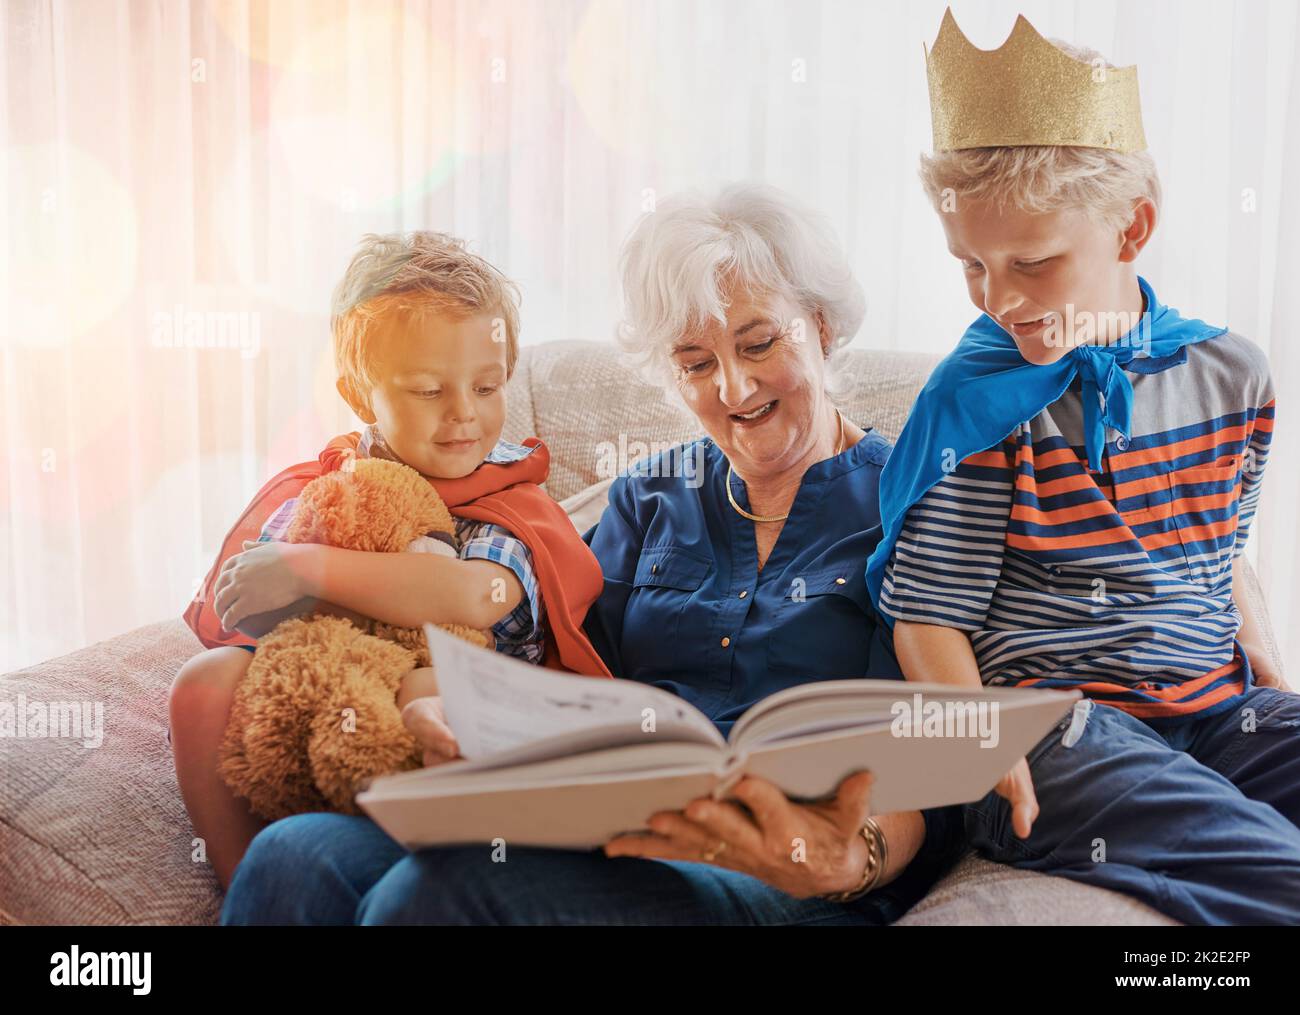 Keeping them entertained. Shot of a senior woman spending time wither her grandsons. Stock Photo